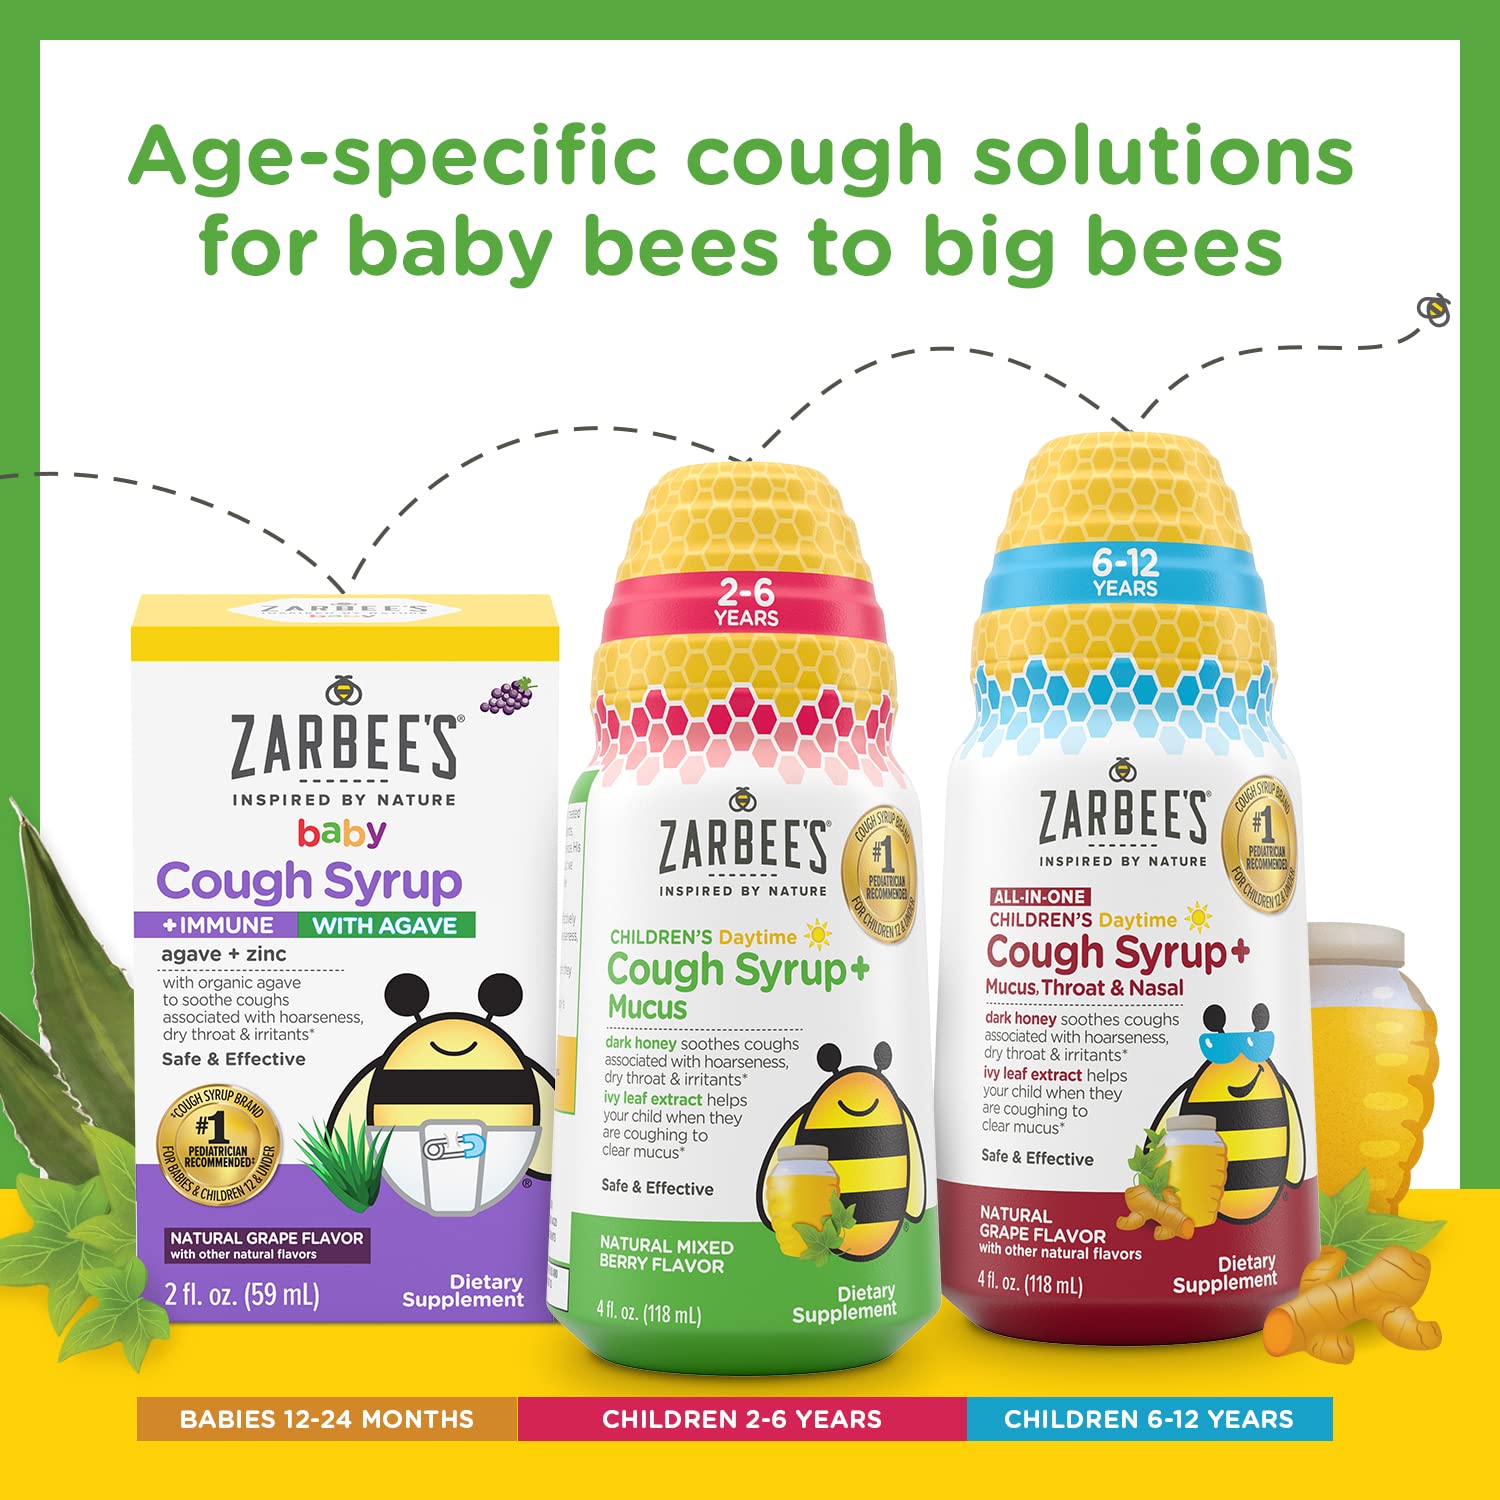 Zarbee's Kids Cough + Mucus Day/Night Value Pack for Children 2-6 with Dark Honey, Ivy Leaf, Zinc & Elderberry, 1 Pediatrician Recommended, Drug & Alcohol-Free, Mixed Berry Flavor, 2x4FL Oz